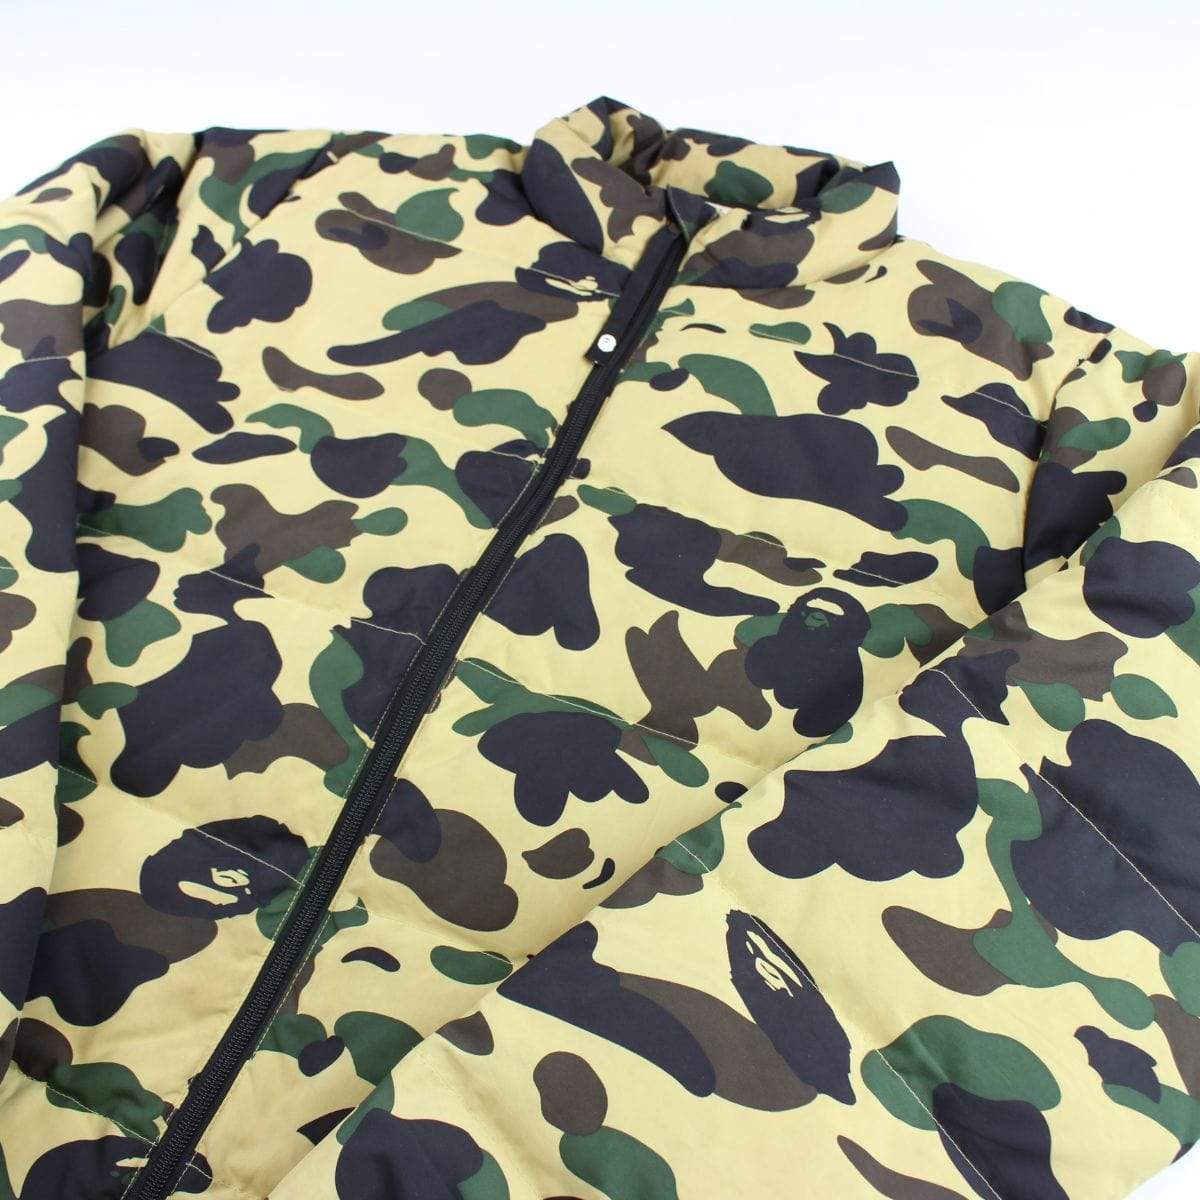 bape 1st yellow camo puffer jacket - SaruGeneral